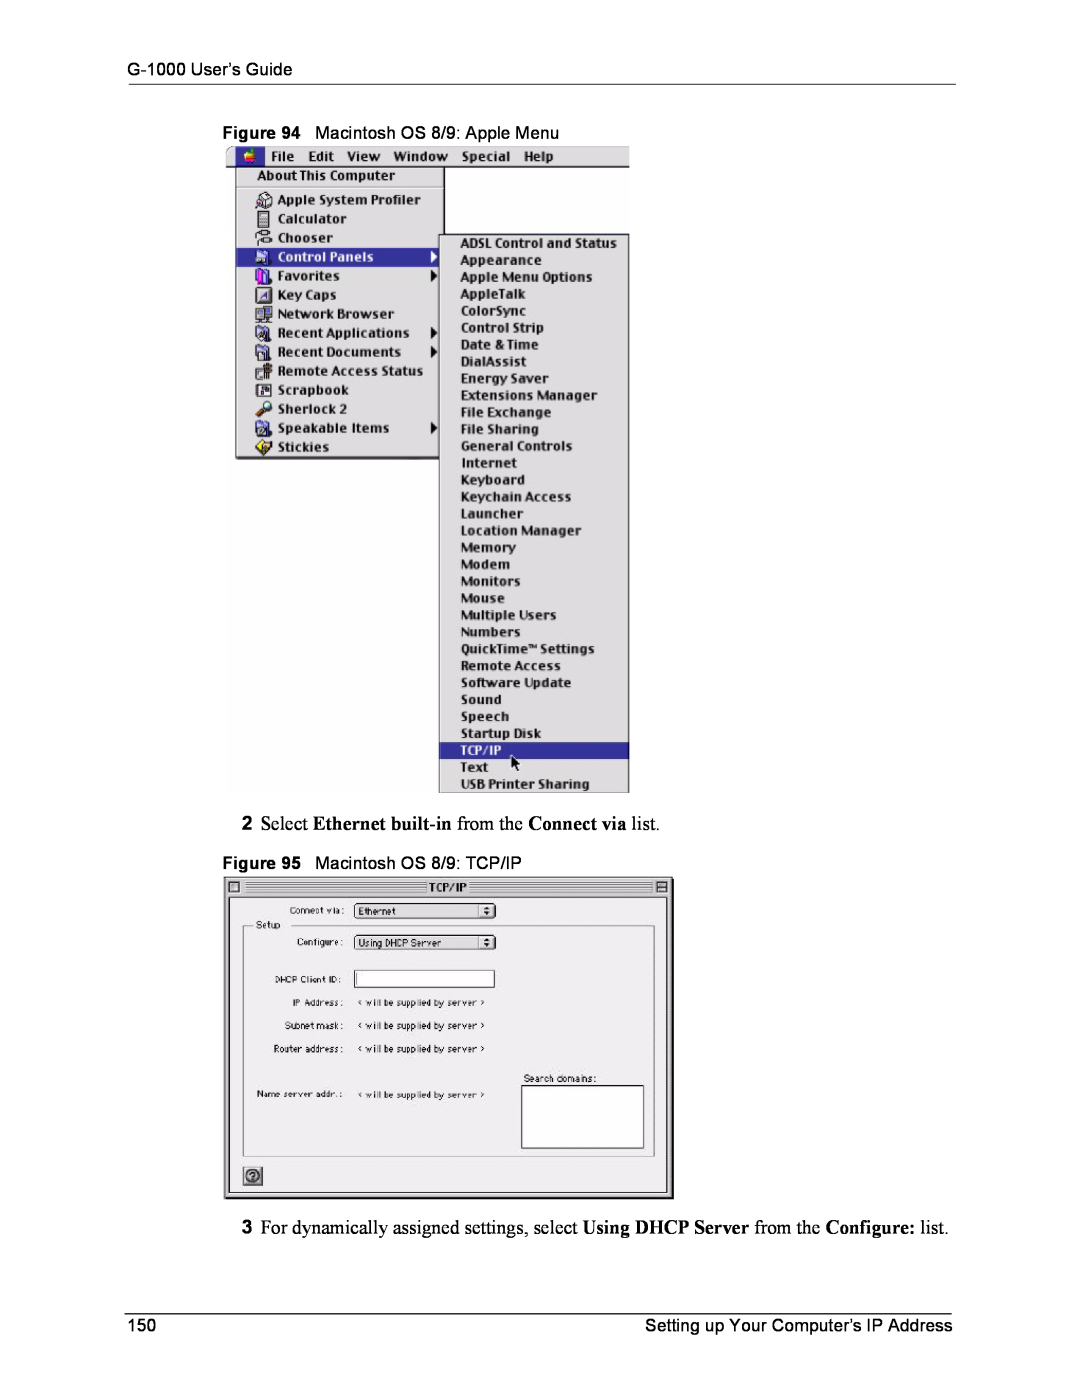 ZyXEL Communications Select Ethernet built-in from the Connect via list, G-1000 User’s Guide, Macintosh OS 8/9 TCP/IP 